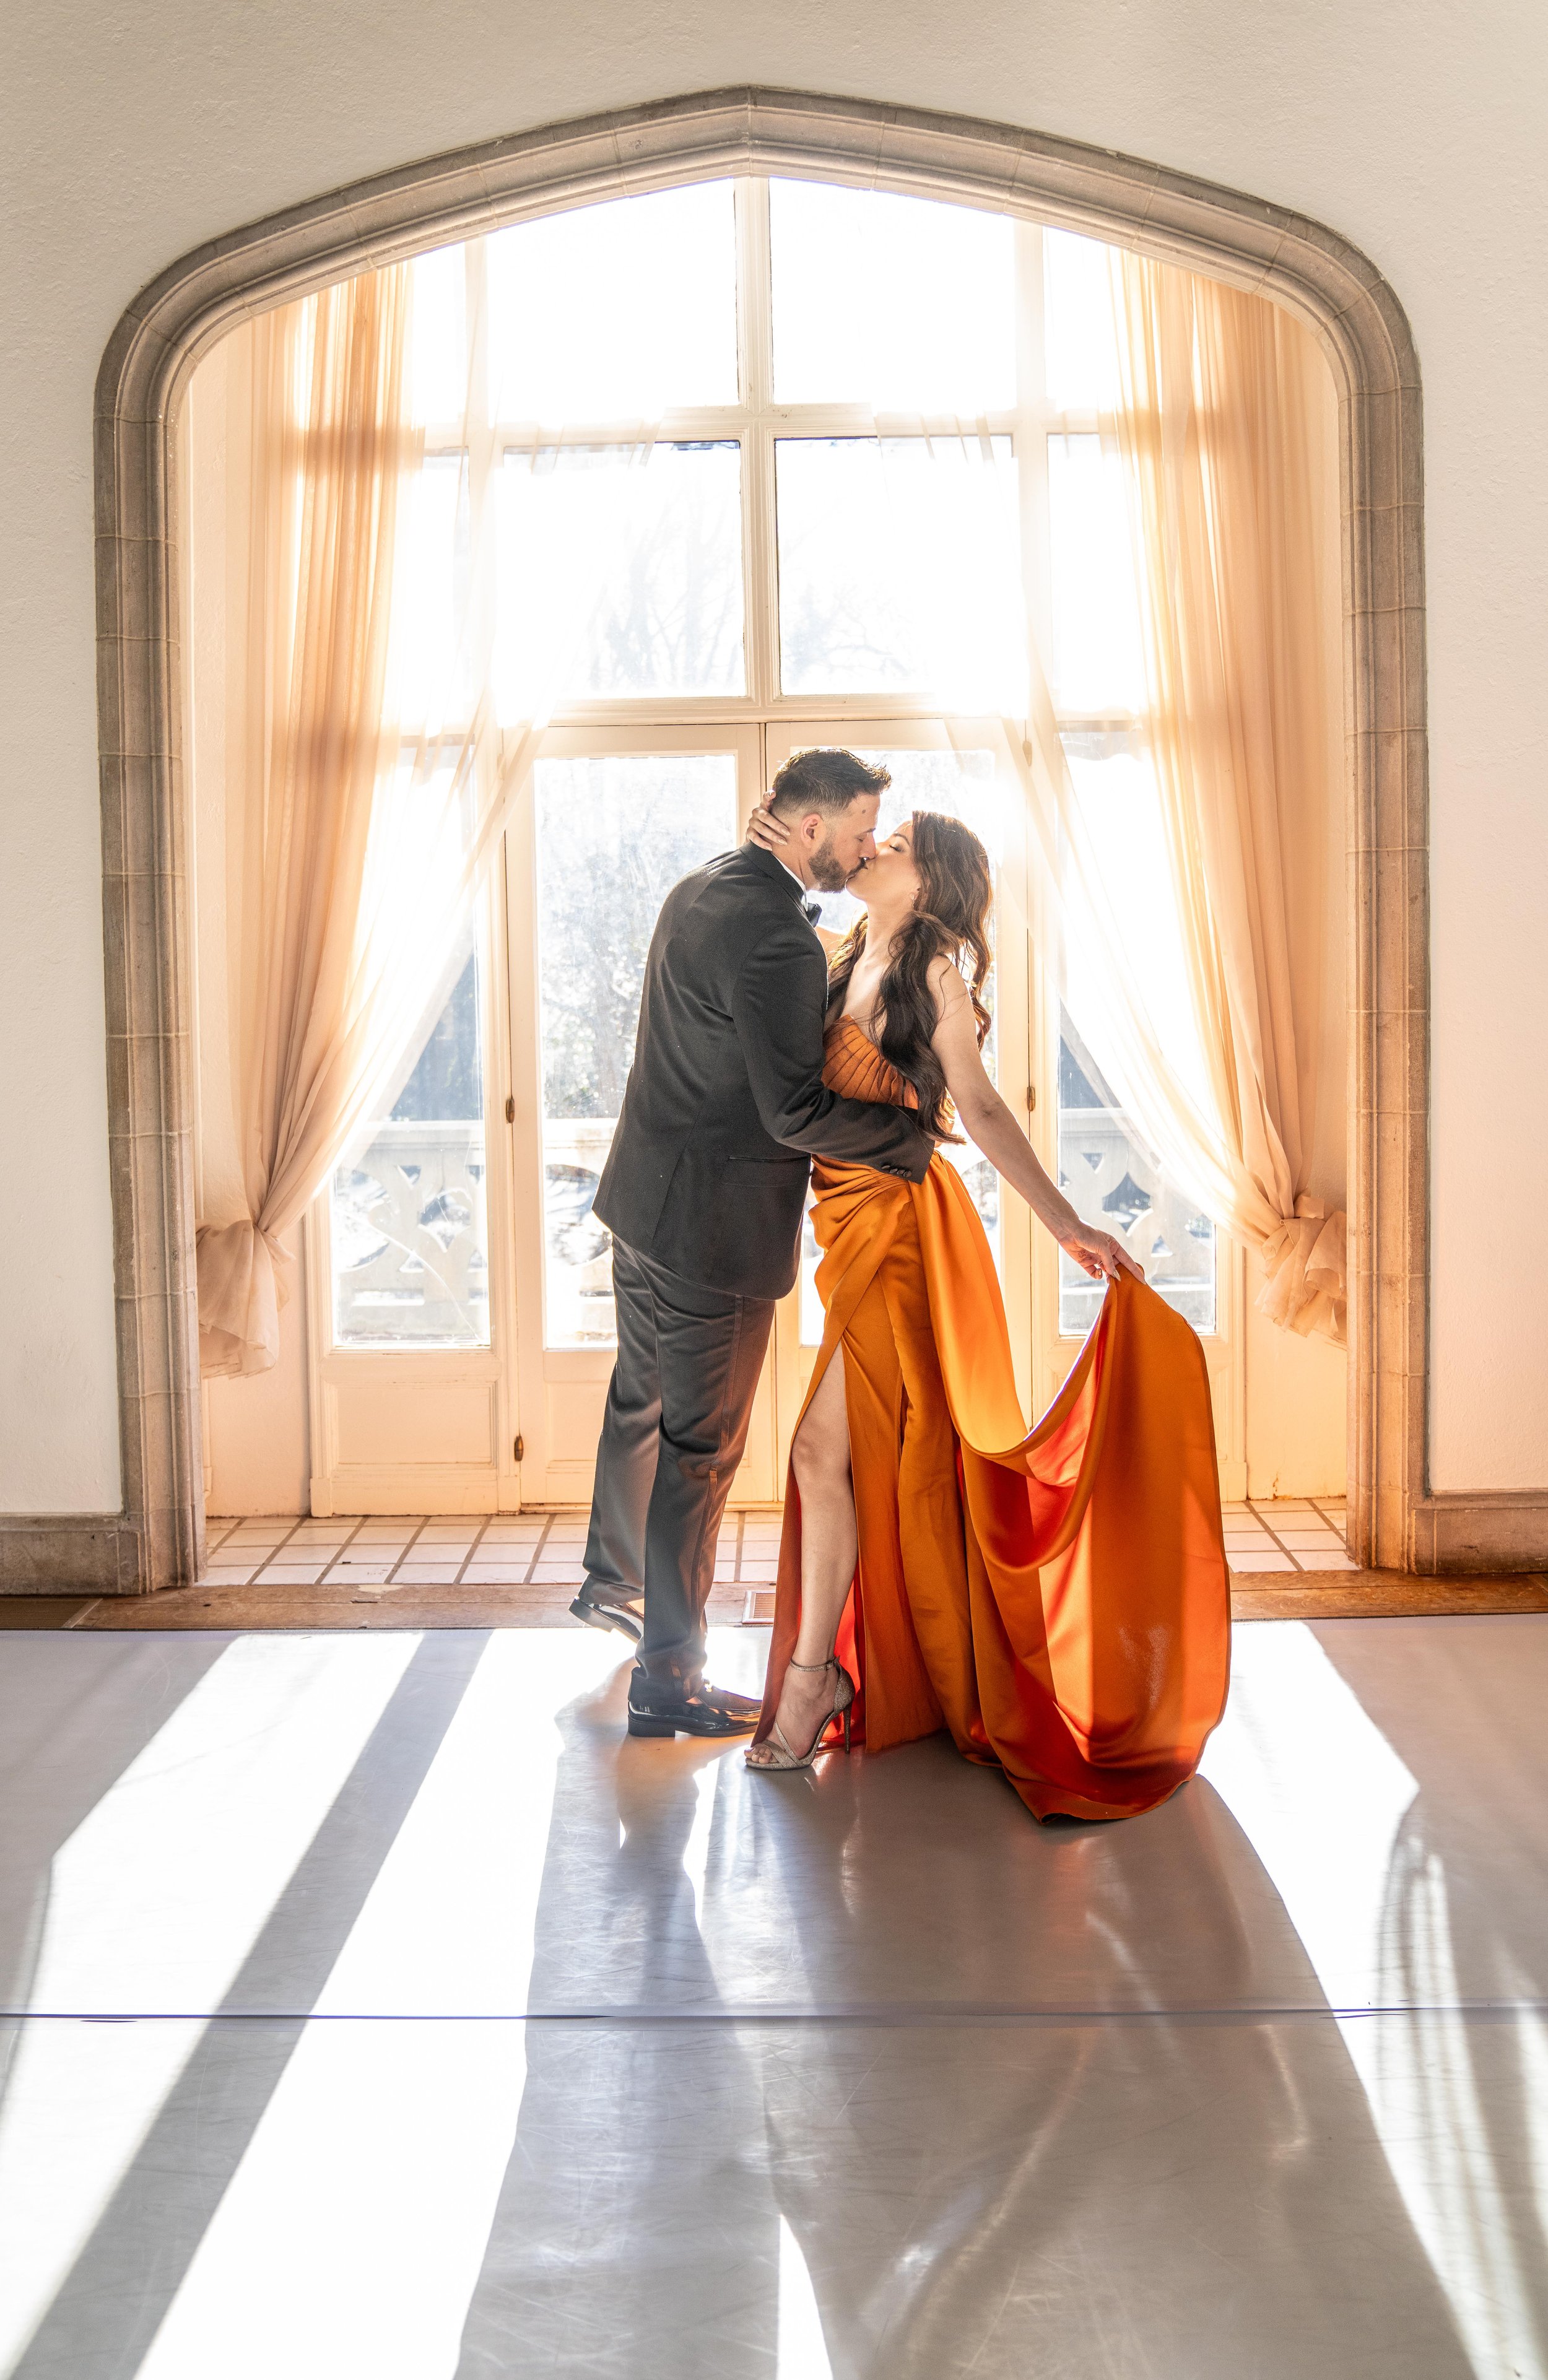 Photography by the Atlanta's Best Wedding Photographers at AtlantaArtisticWeddings capture the Candid and Intimate Moments with a Photo Documentary Style by masterning lighting and the love between a couple in a documentary style photography and Boll